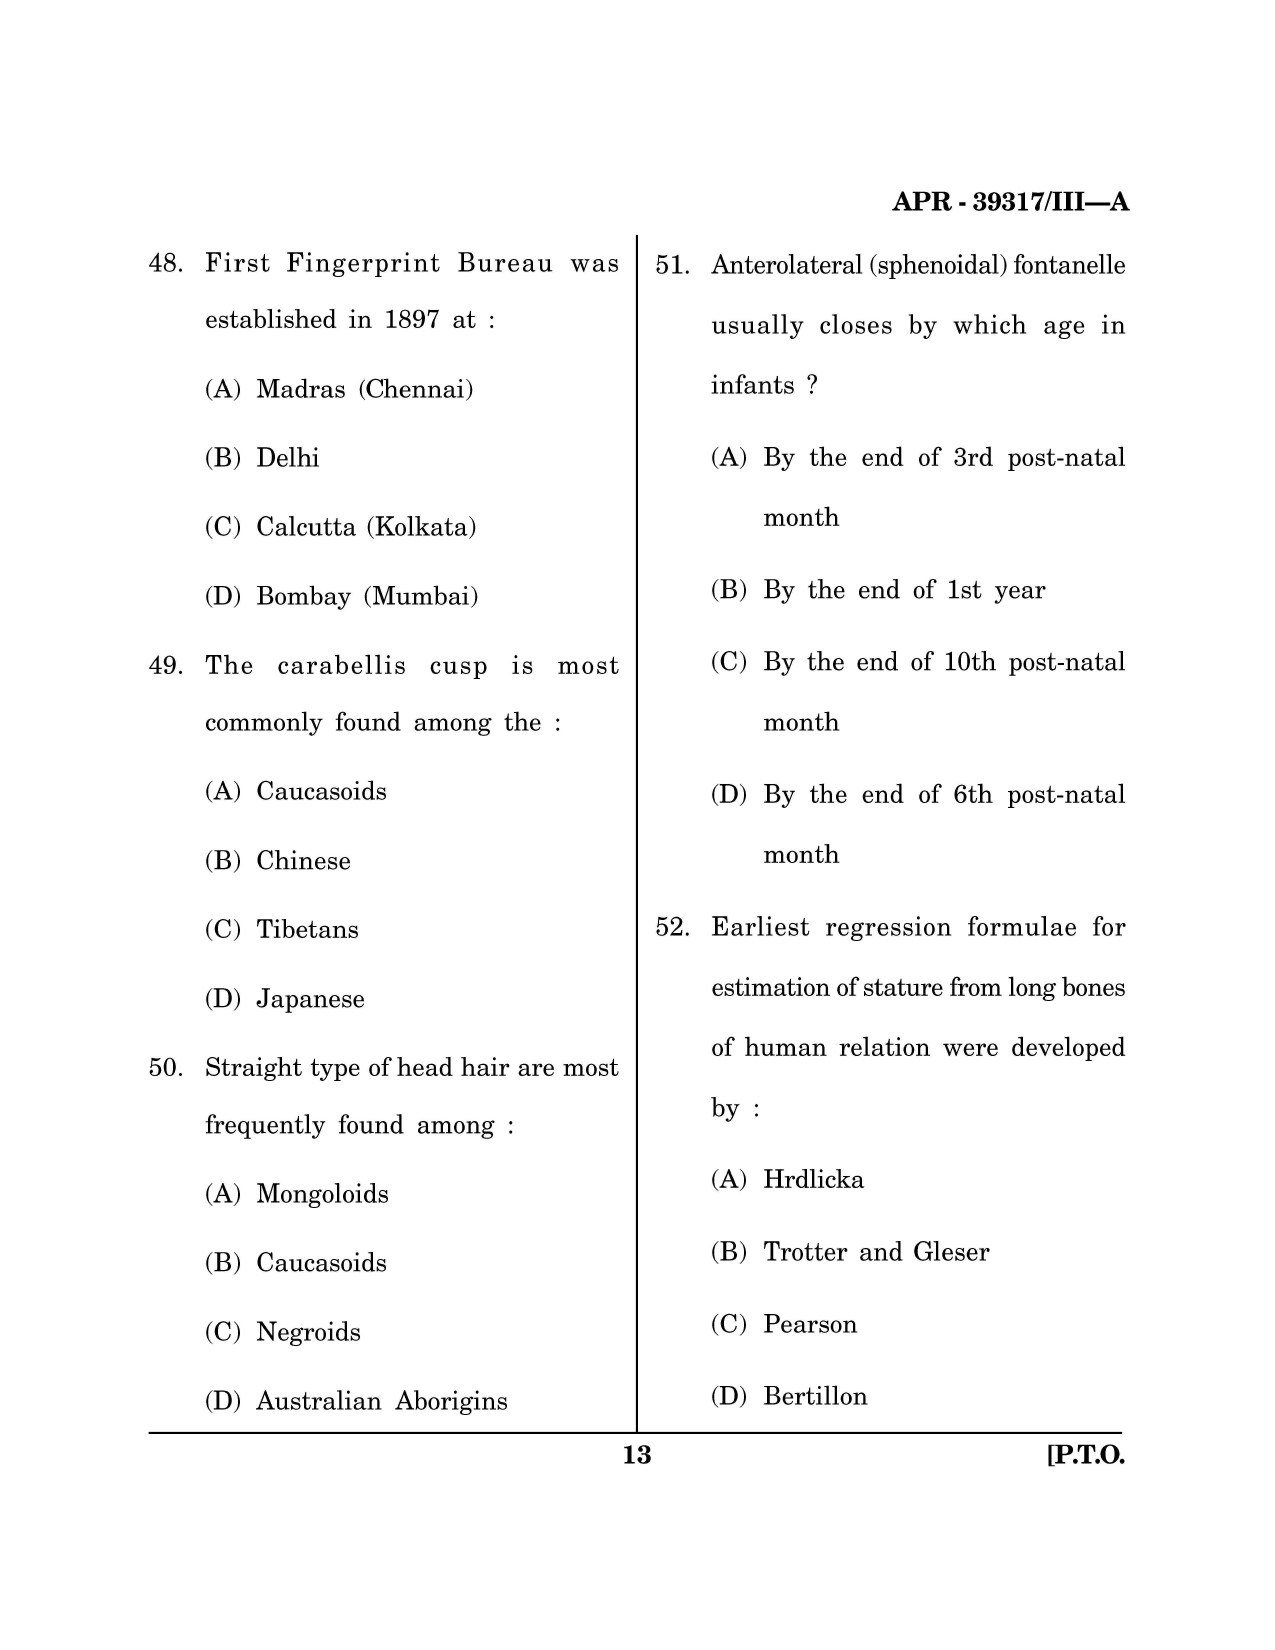 Maharashtra SET Forensic Science Question Paper III April 2017 12